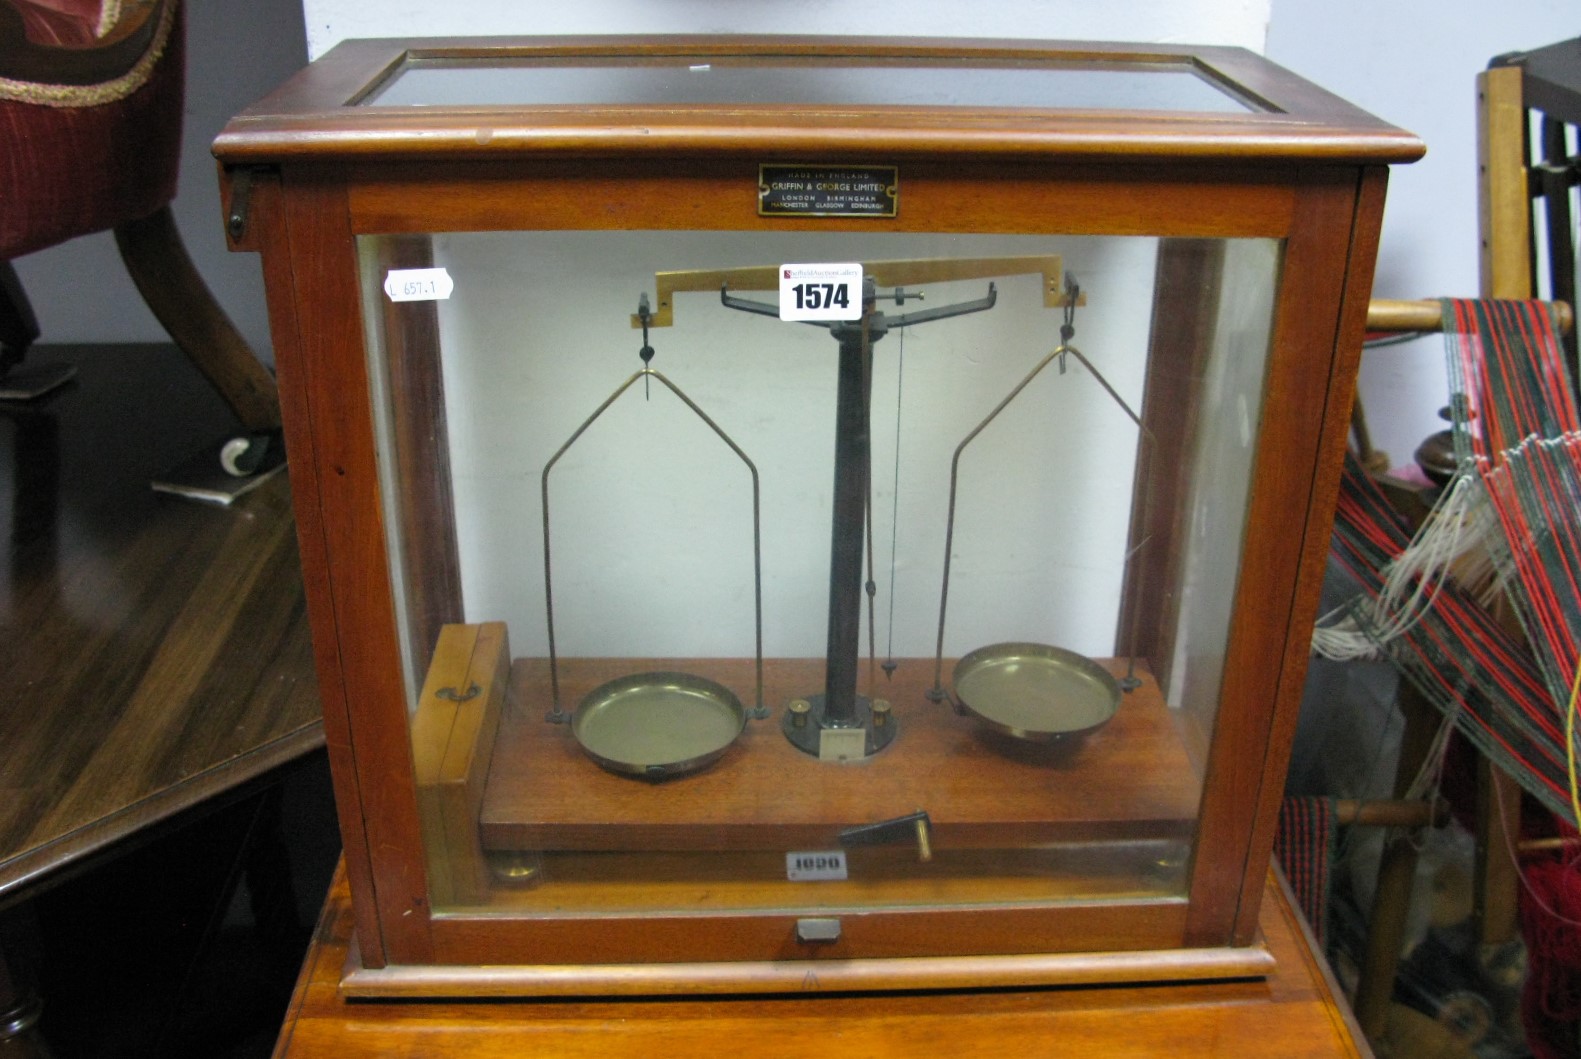 A Mahogany Cased Set of Chemists Scales, applied label 'Griffin and George Ltd'.